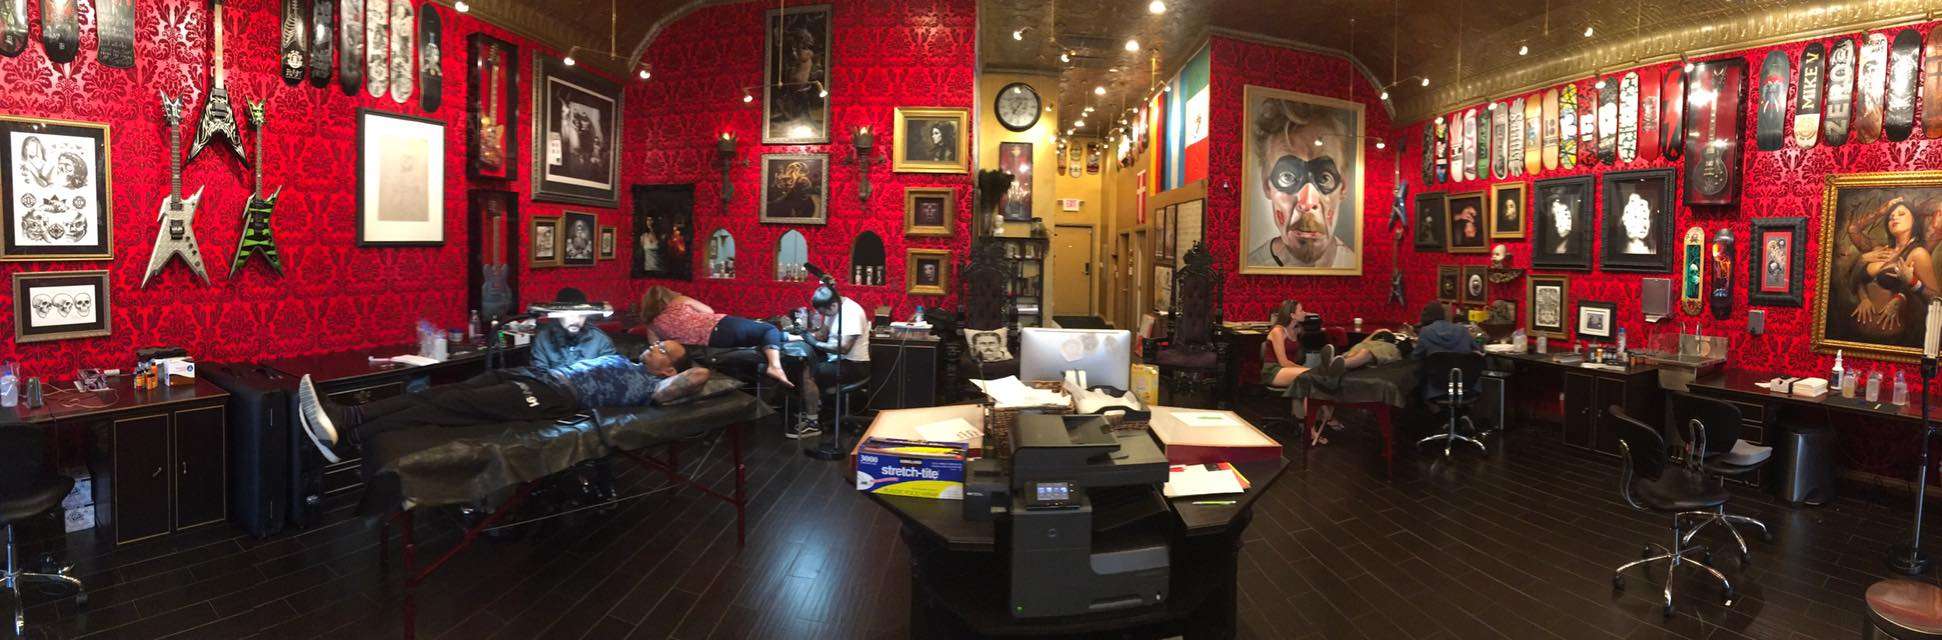 Kat Von D is Closing High Voltage Tattoo Studio in WeHo | WEHO TIMES West  Hollywood News, Nightlife and Events